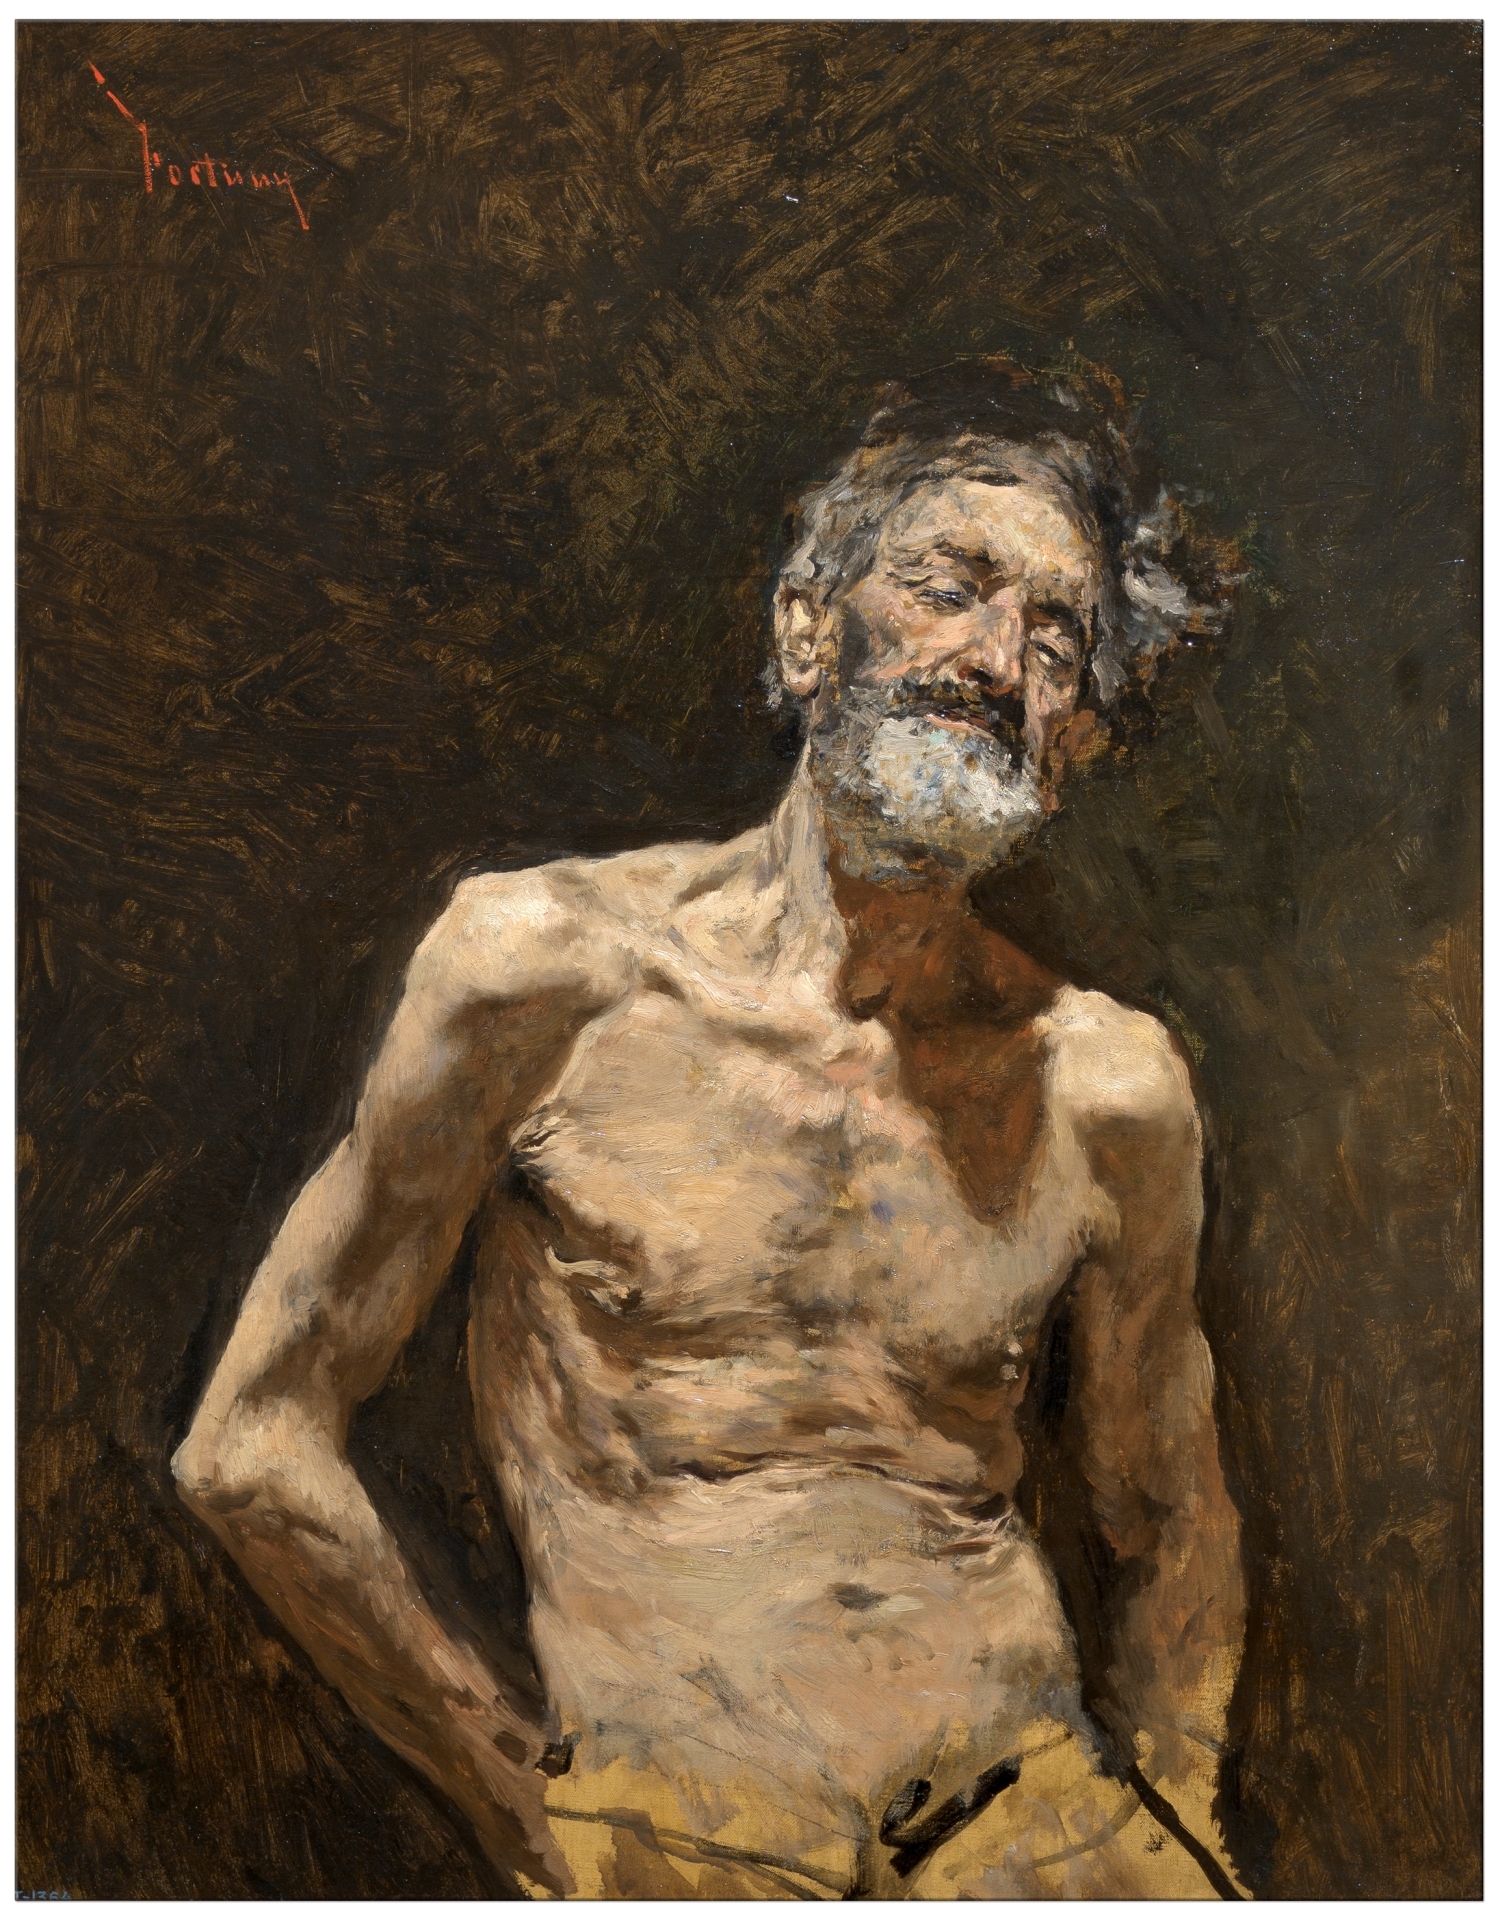 Nude old man